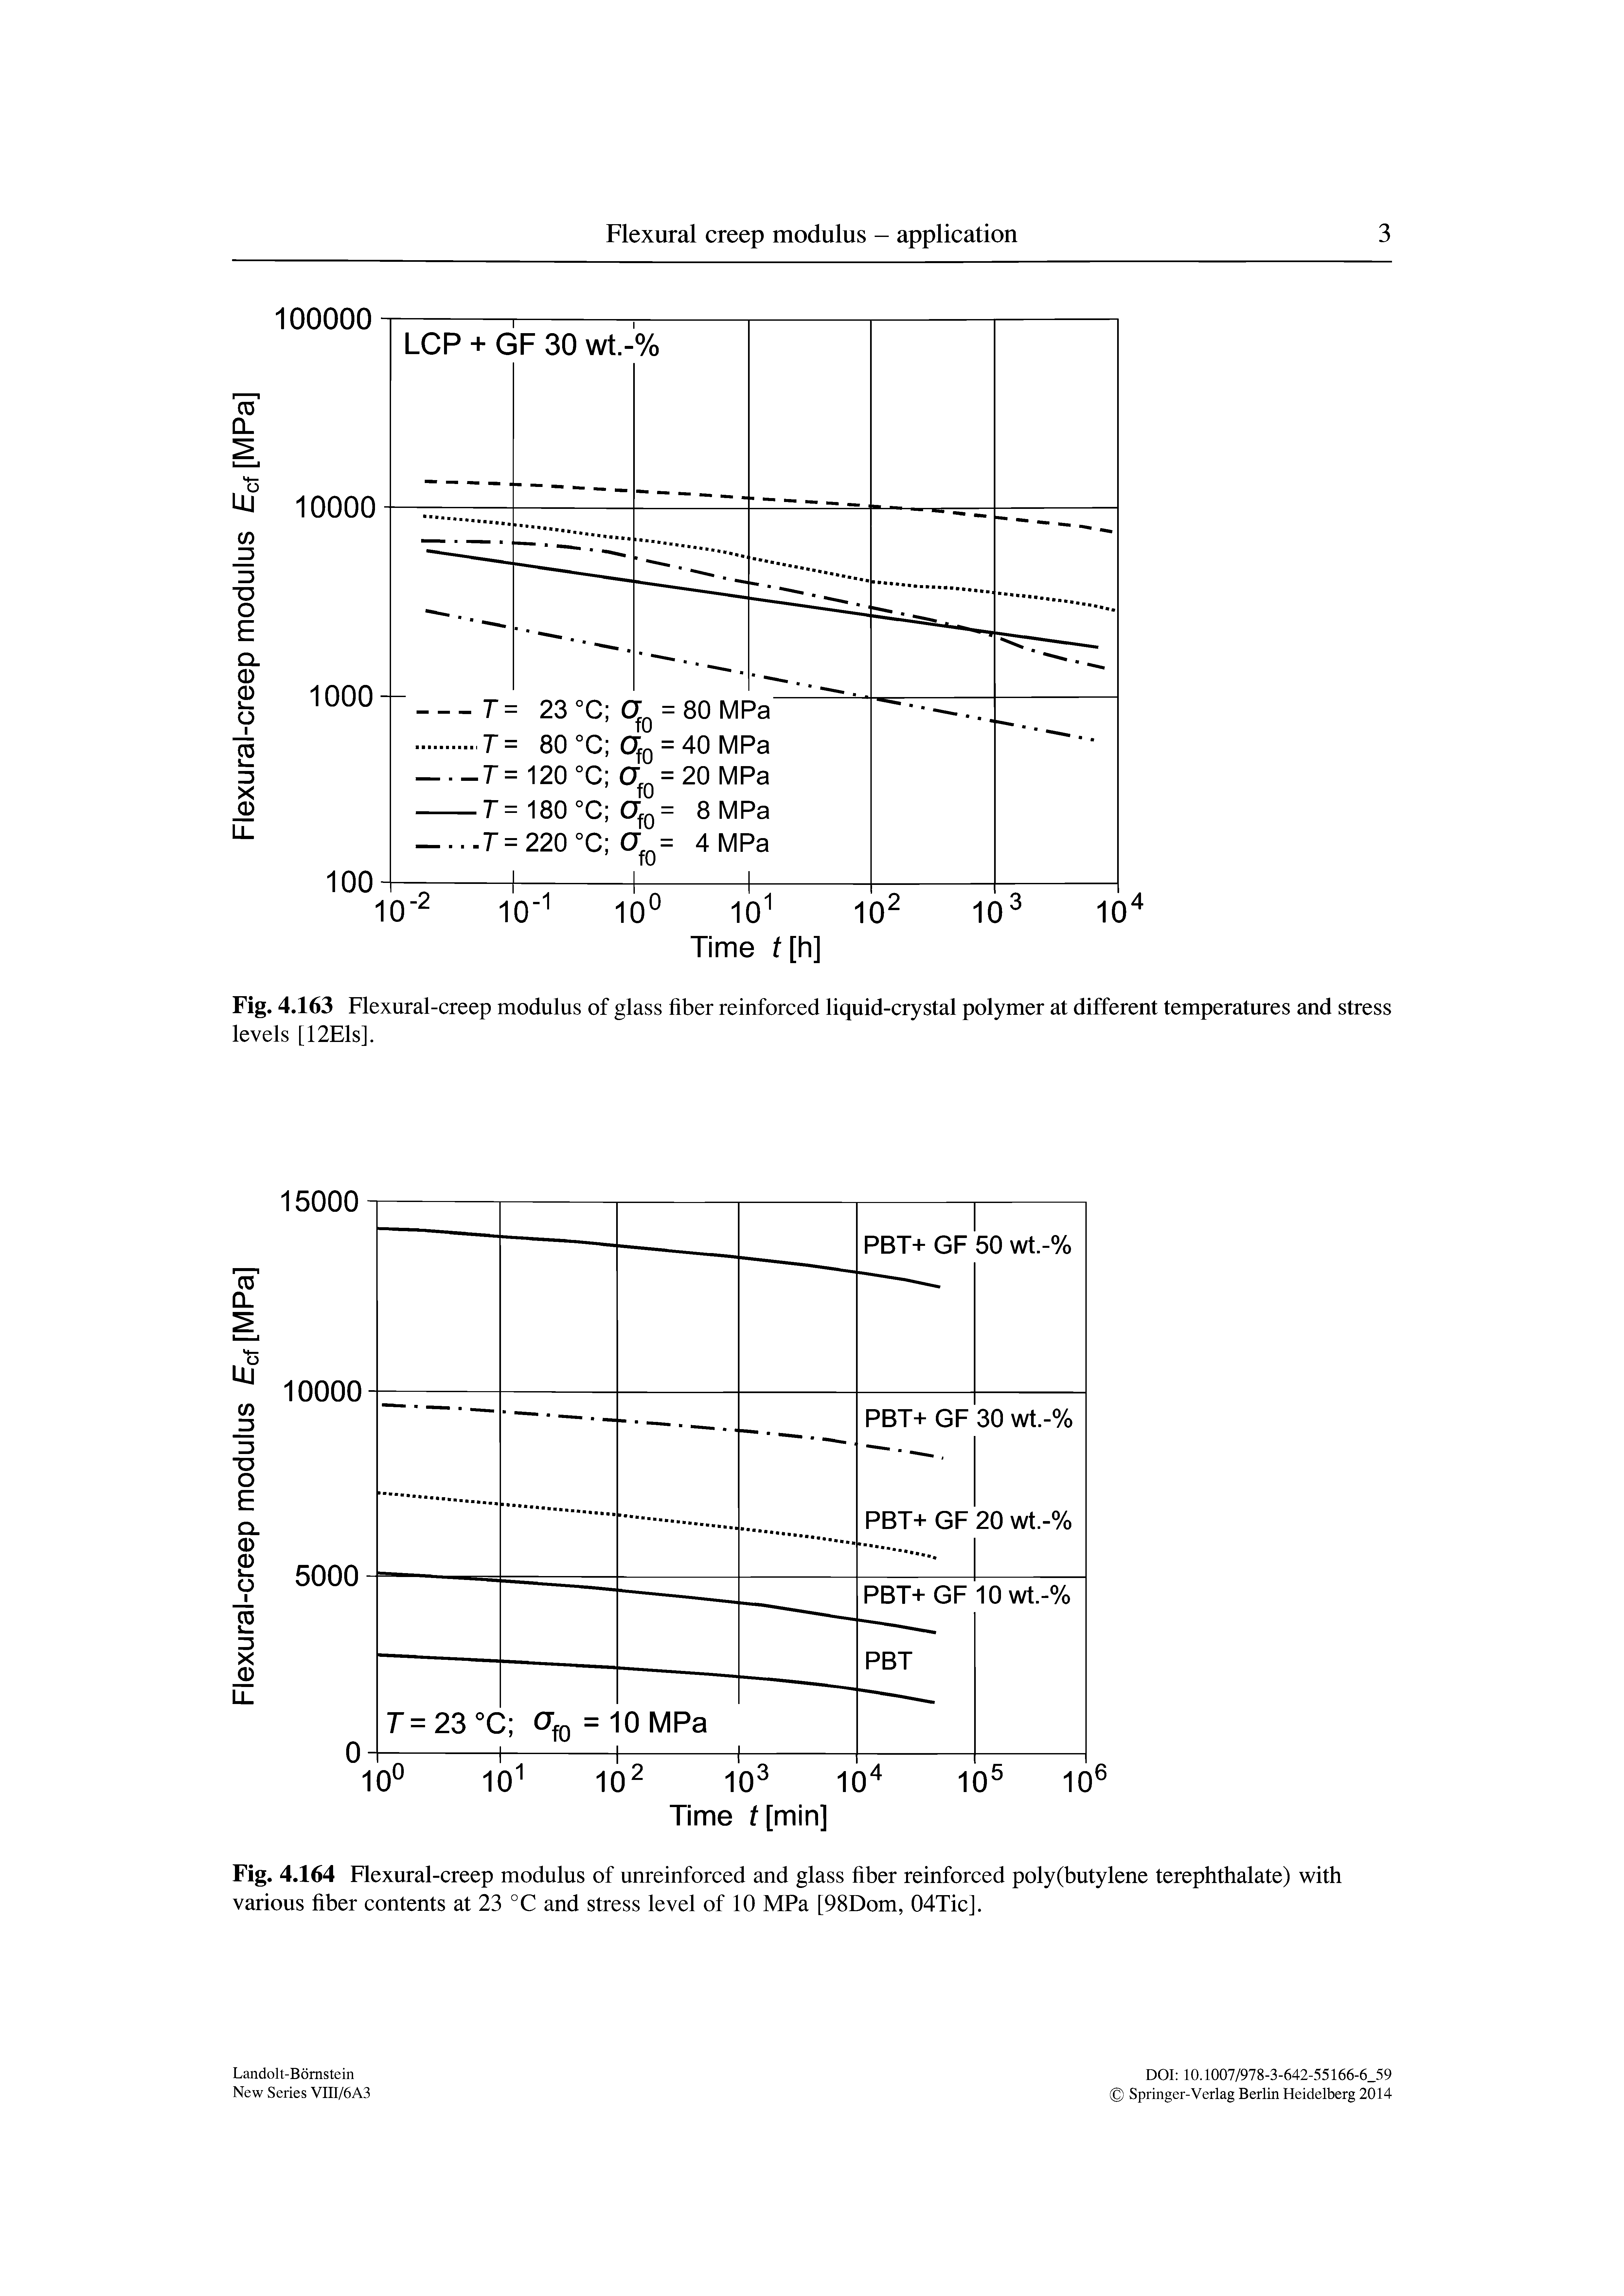 Fig. 4.164 Flexural-creep modulus of unreinforced and glass fiber reinforced poly(butylene terephthalate) with various fiber contents at 23 °C and stress level of 10 MPa [98Dom, 04Tic].